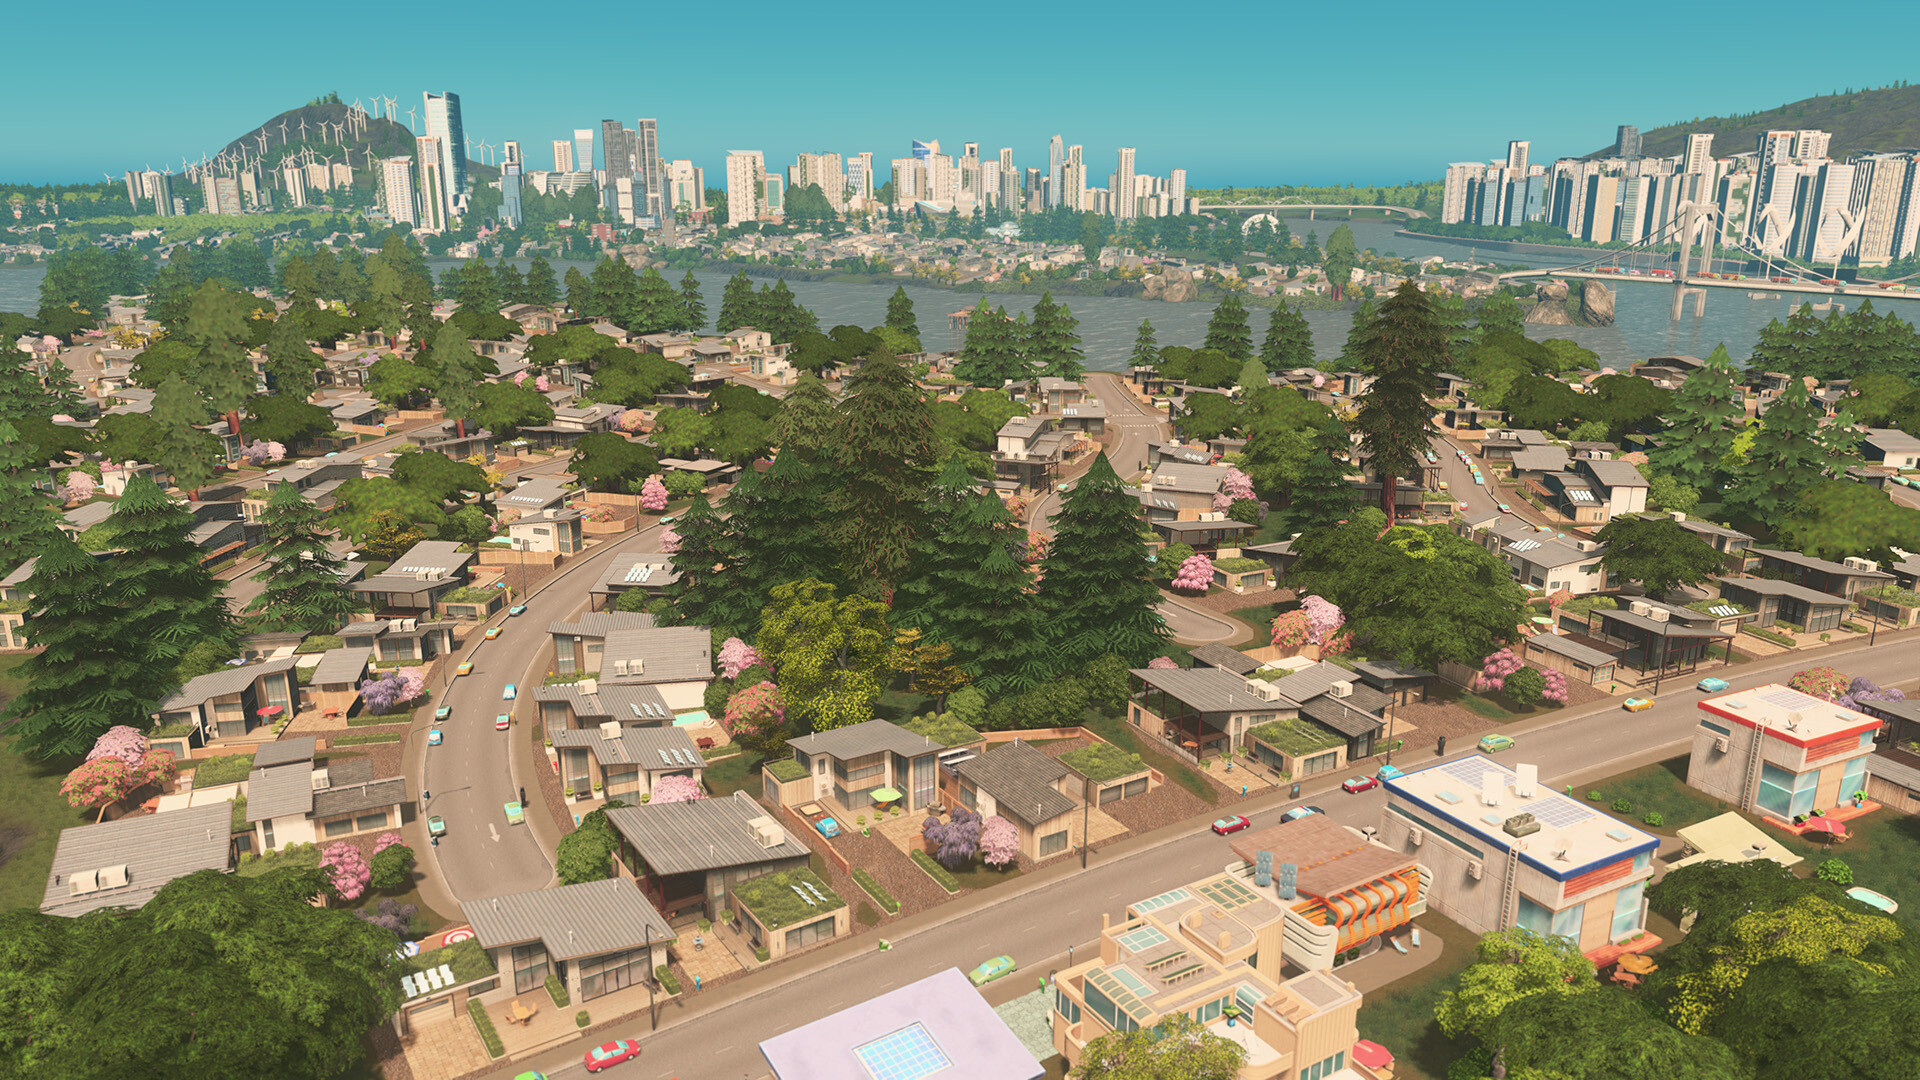 Cities: Skylines adds European maps and buildings for free today